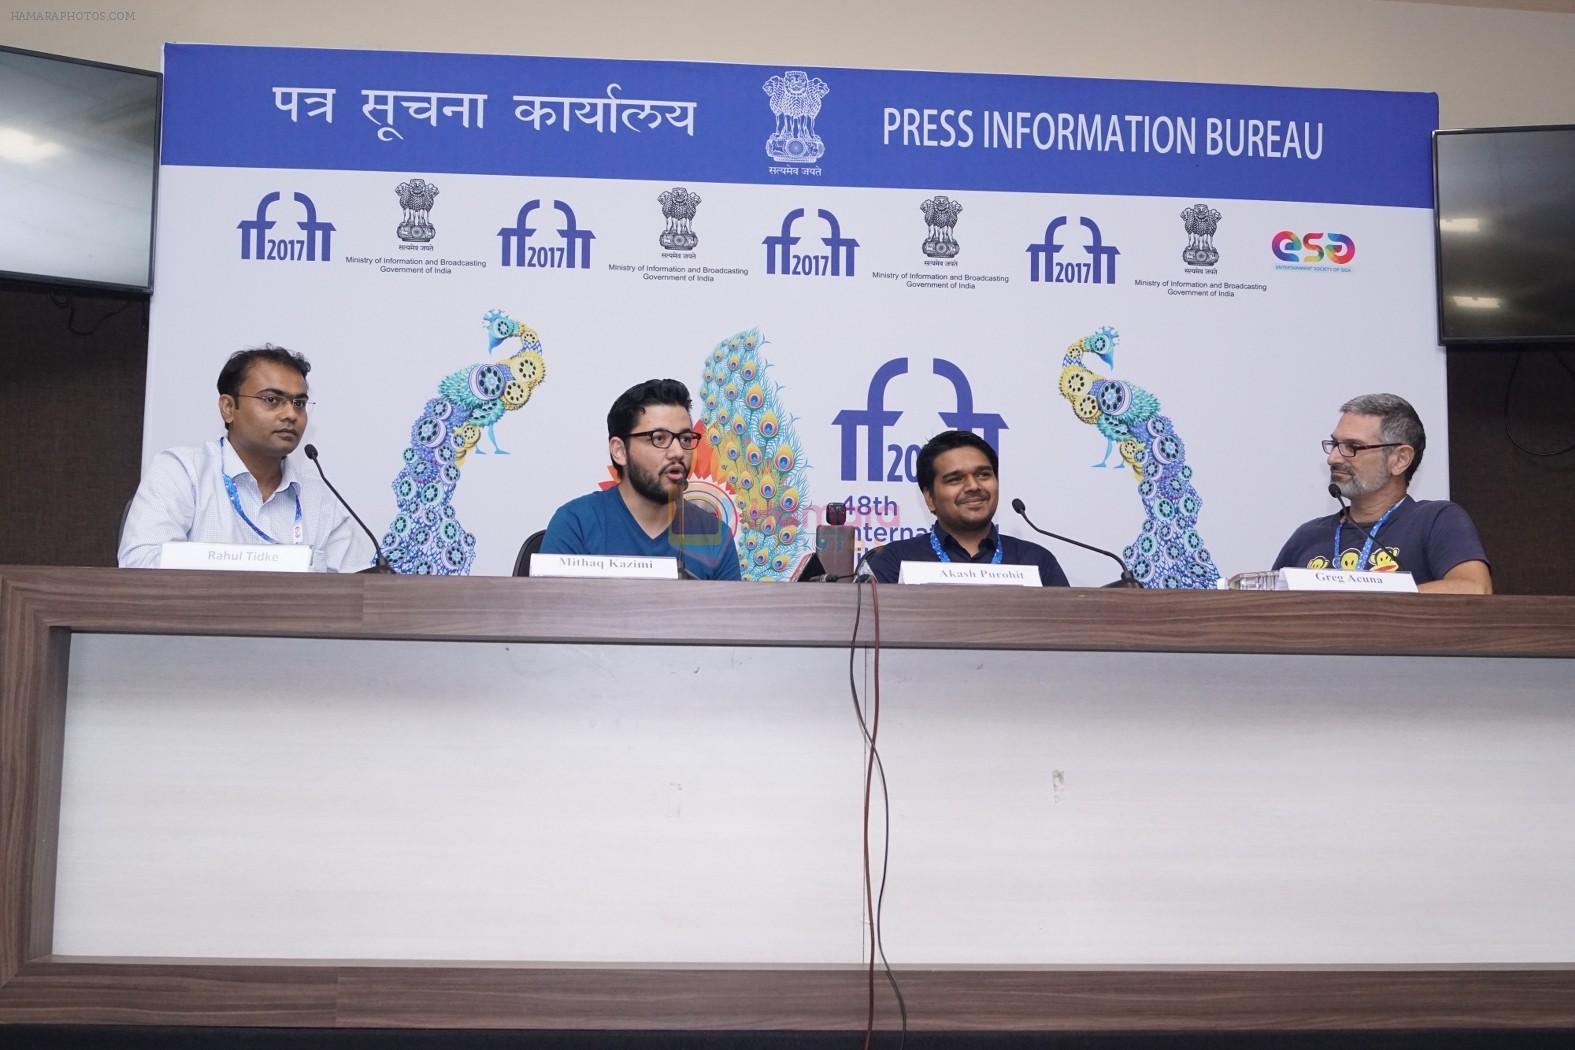 at the Press Conference - Media Tech Start-up Expo (IFFI 2017) on 27th Nov 2017